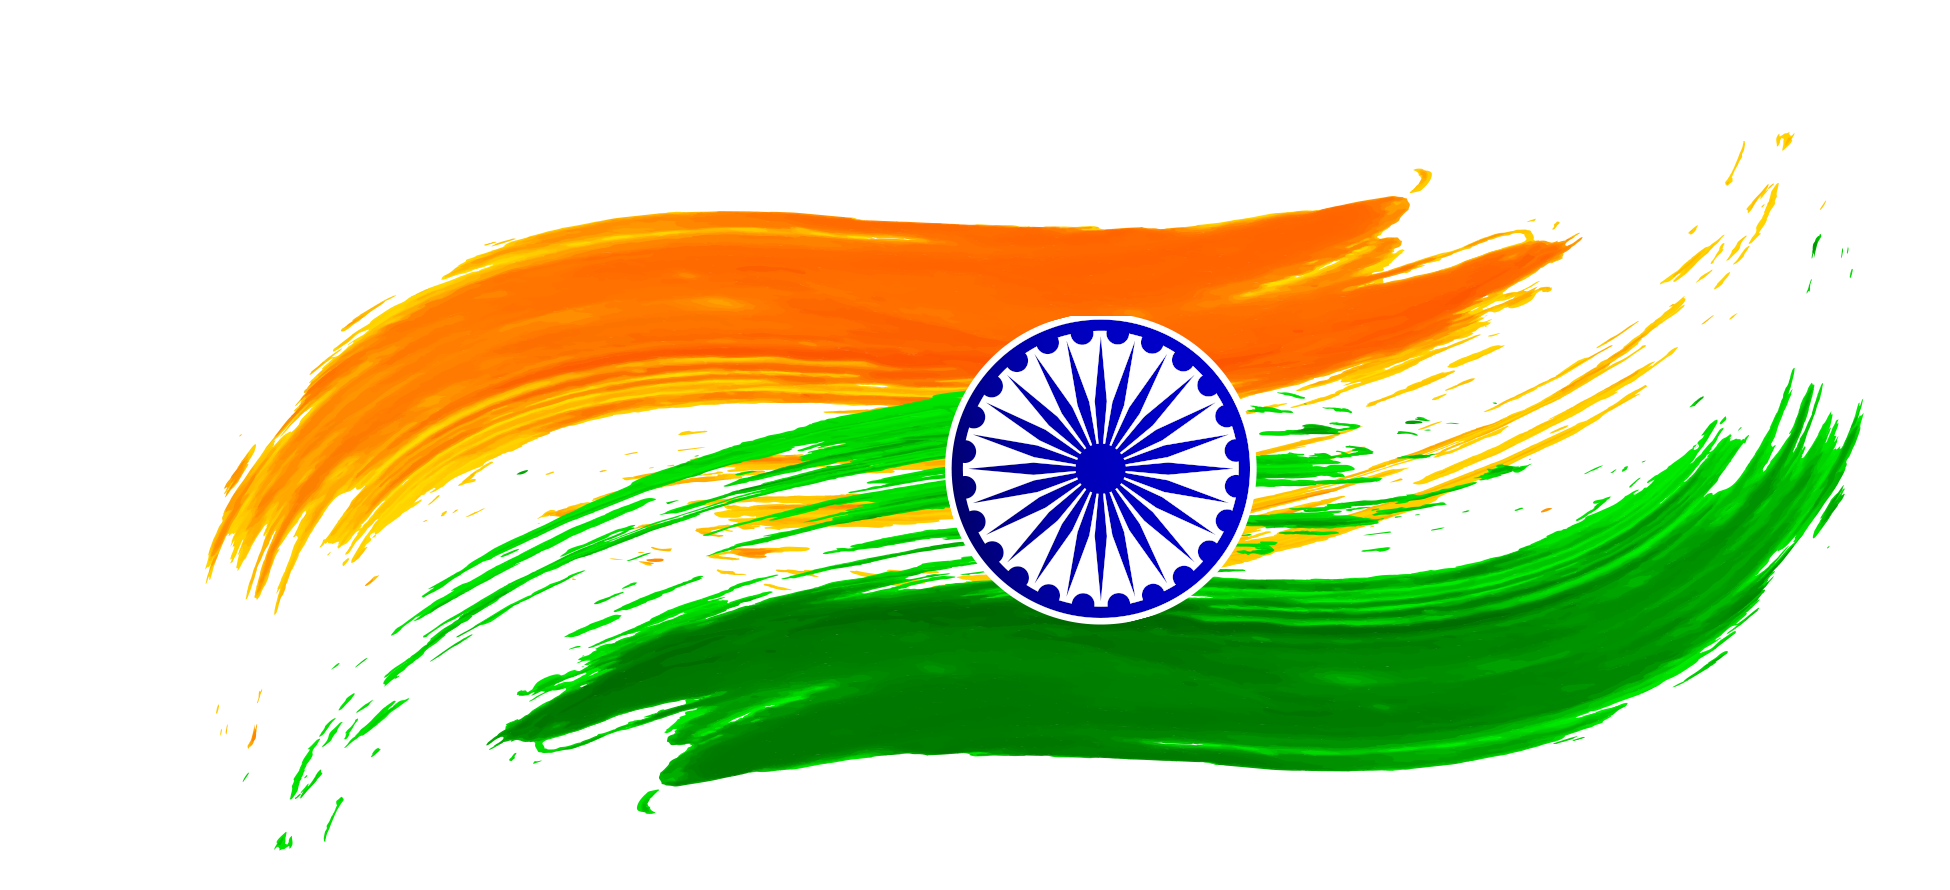 Indian Flag PNG HD Images, Indonesia Flag Free Download - Free Transparent  PNG Logos